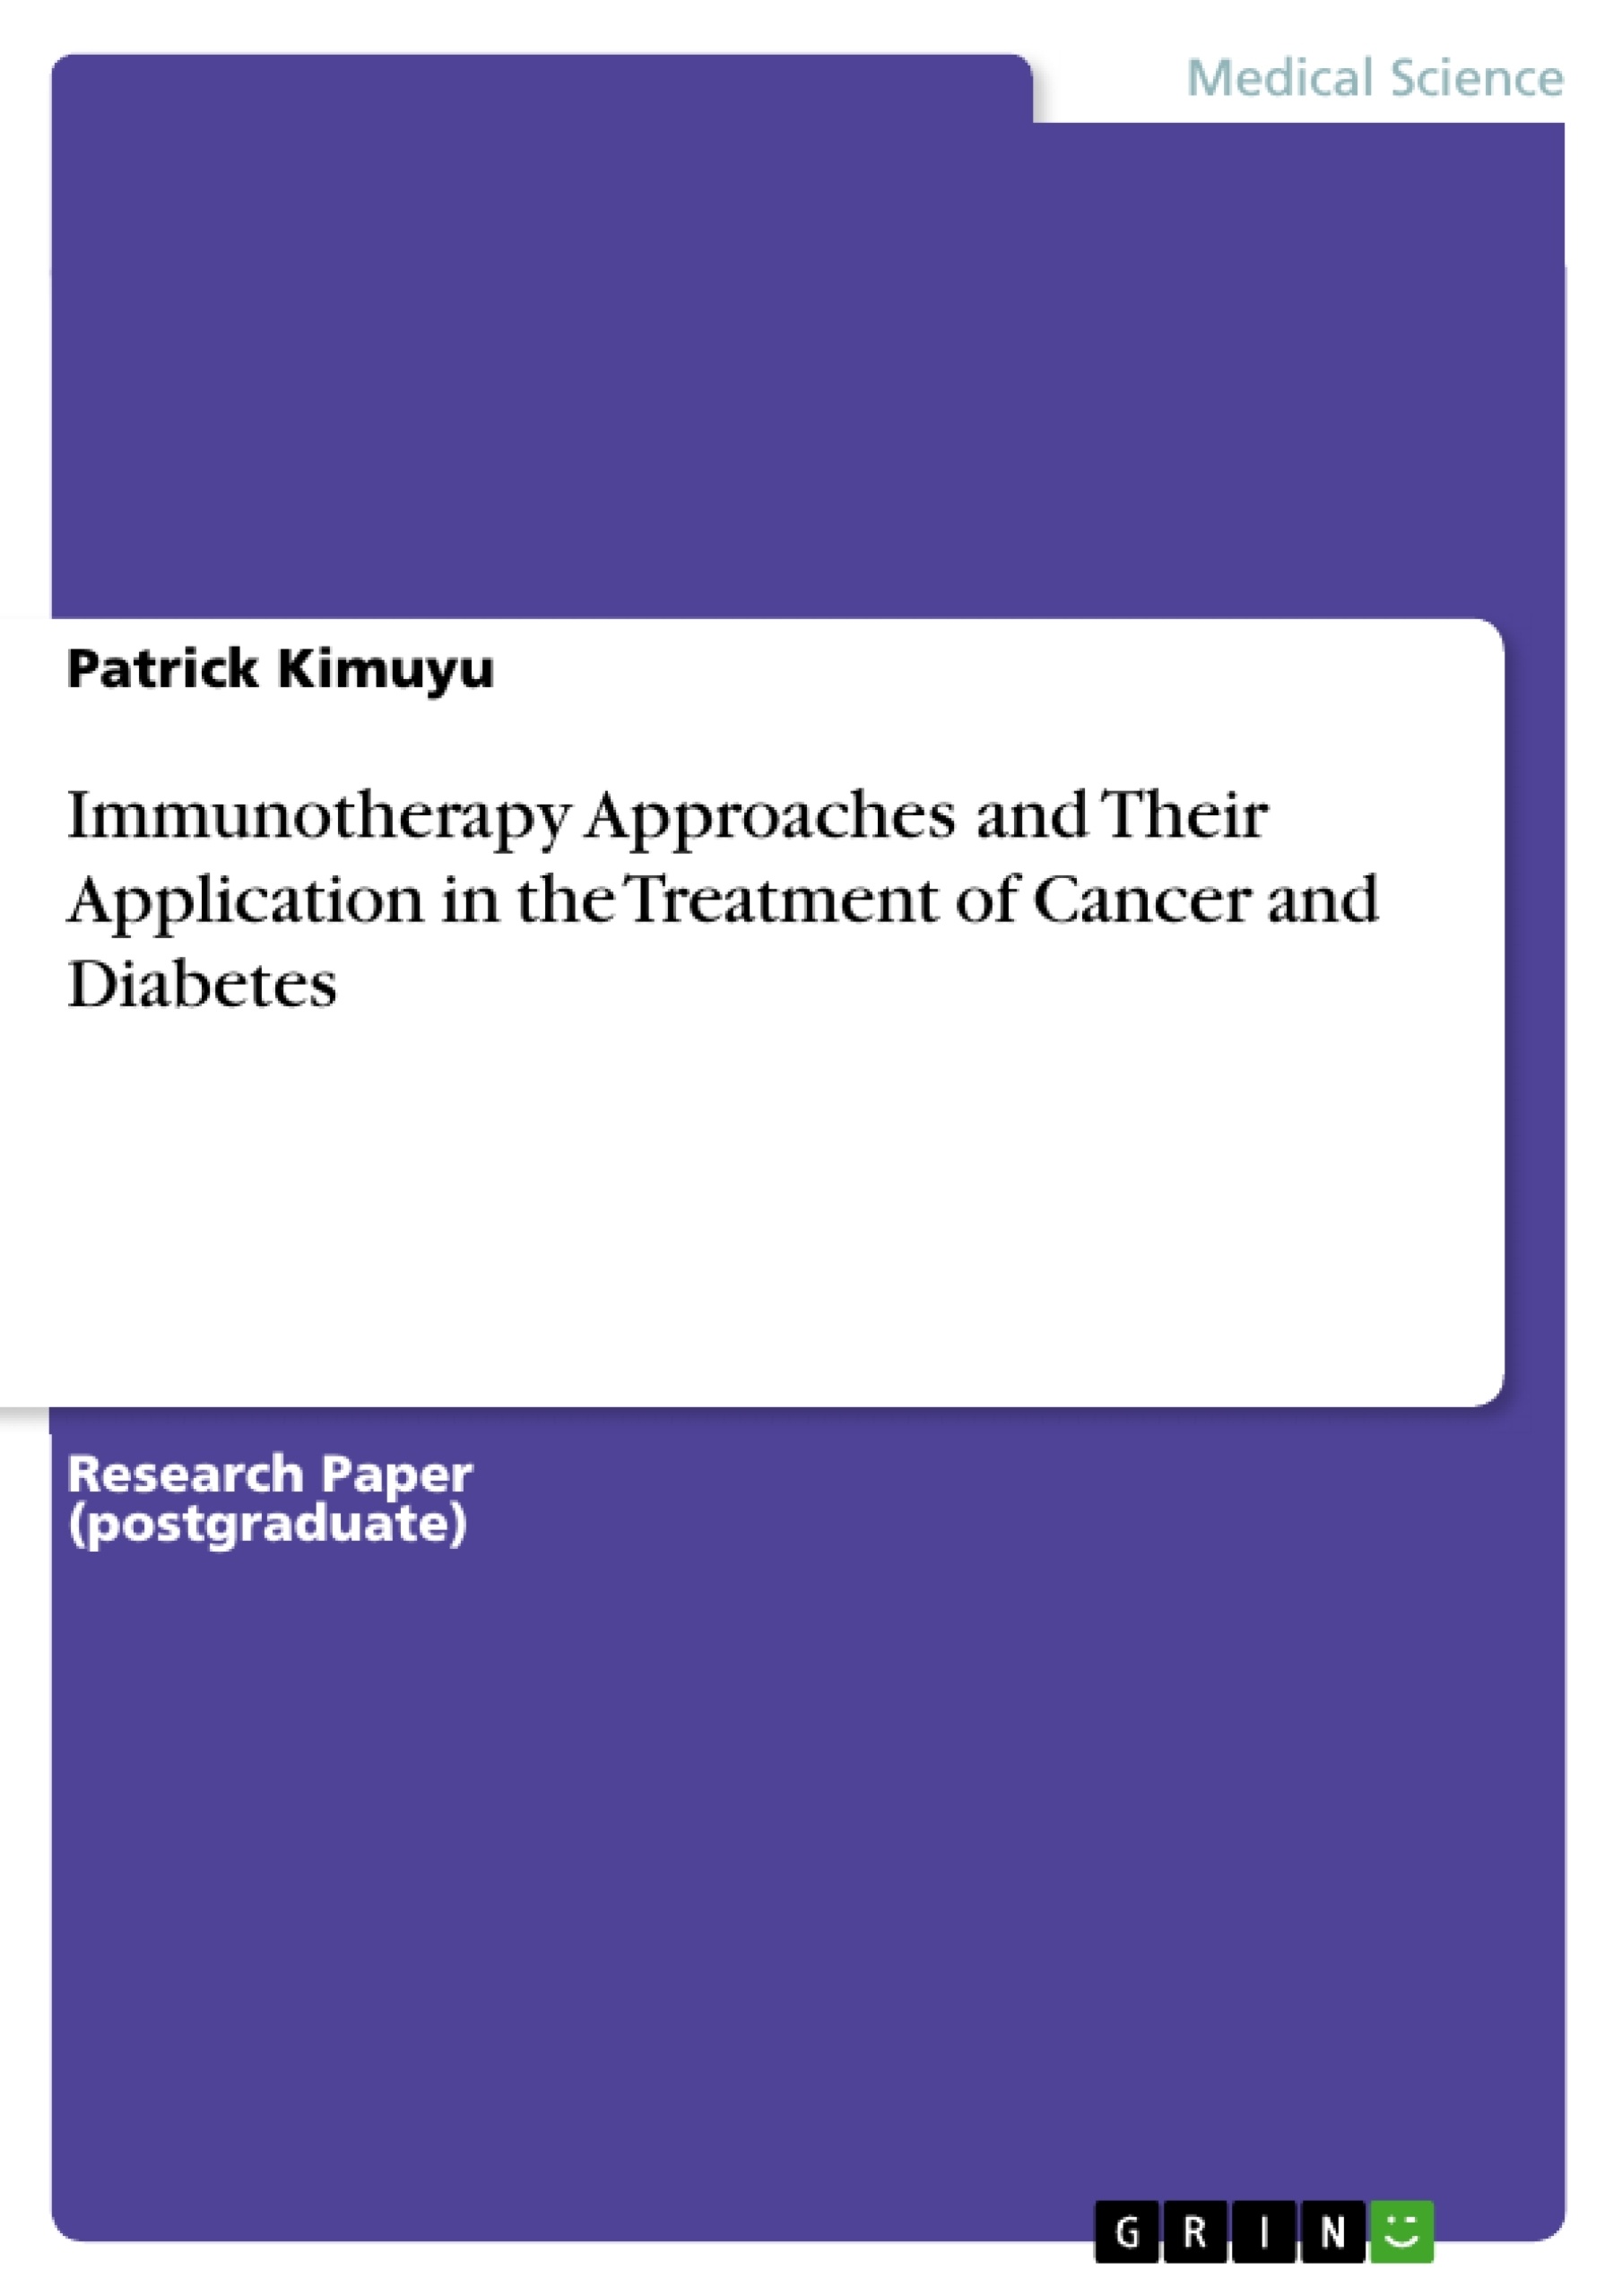 Titre: Immunotherapy Approaches and Their Application in the Treatment of Cancer and Diabetes